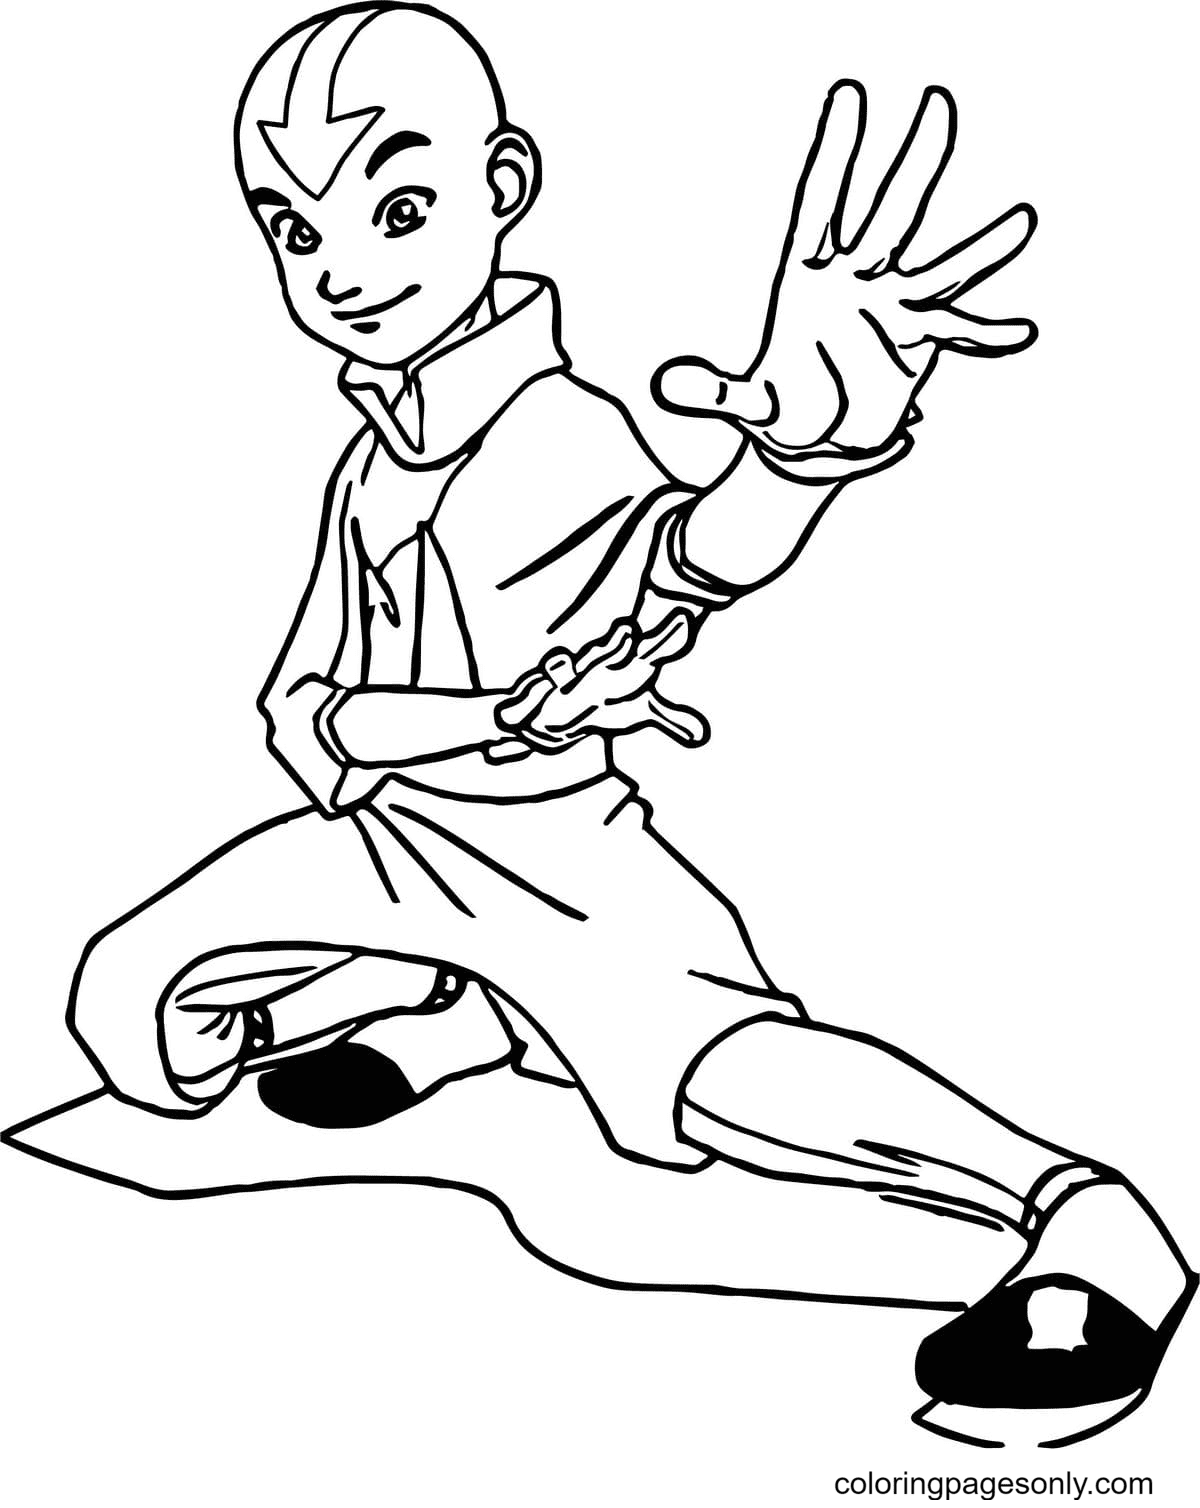 Aang in Training Coloring Page